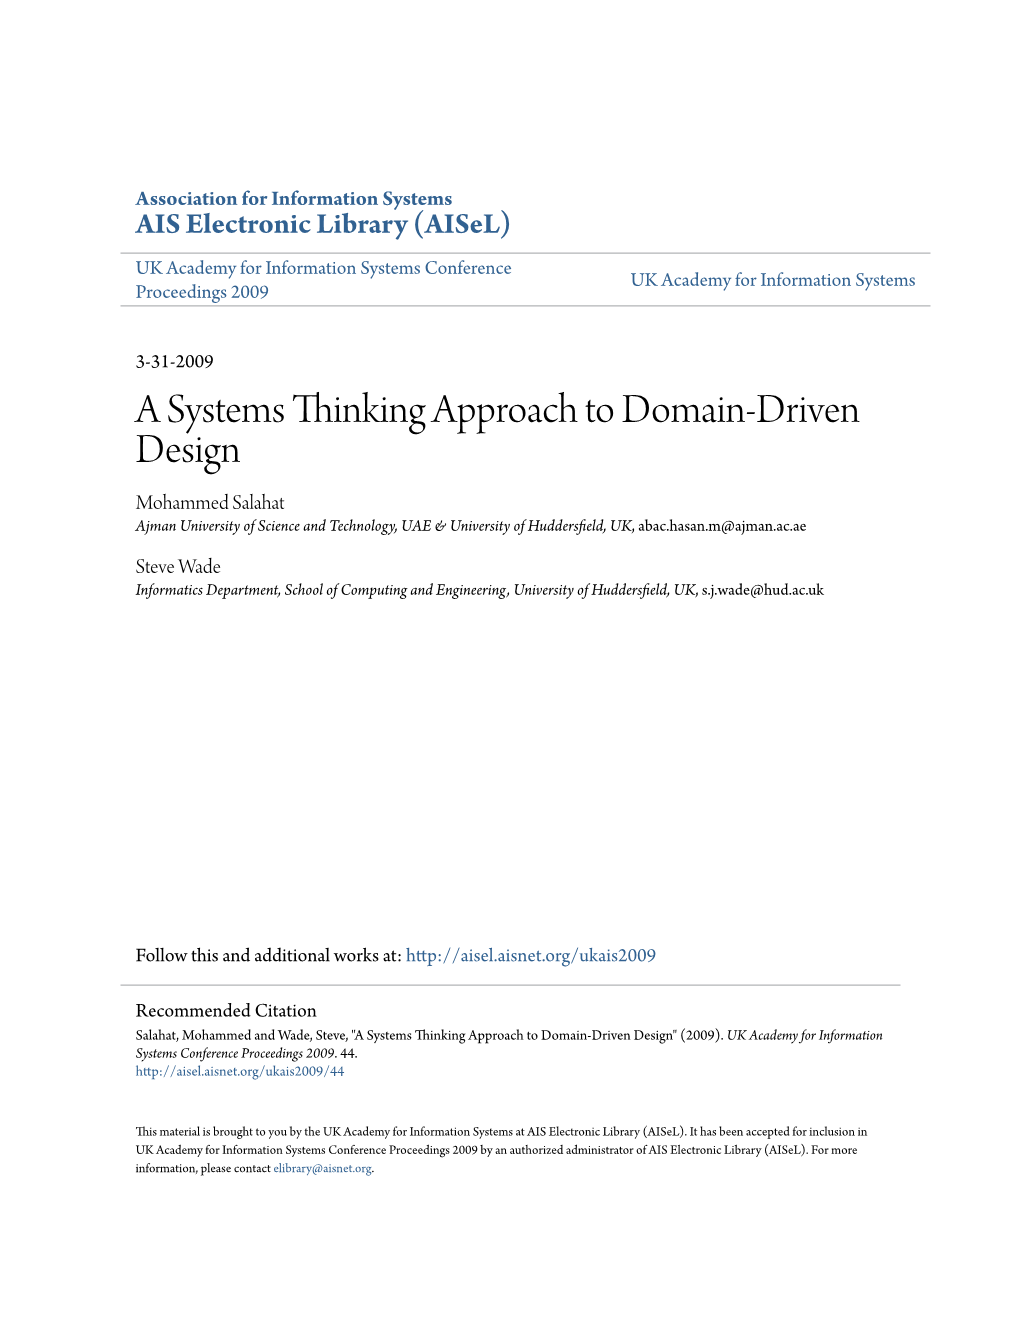 A Systems Thinking Approach to Domain-Driven Design